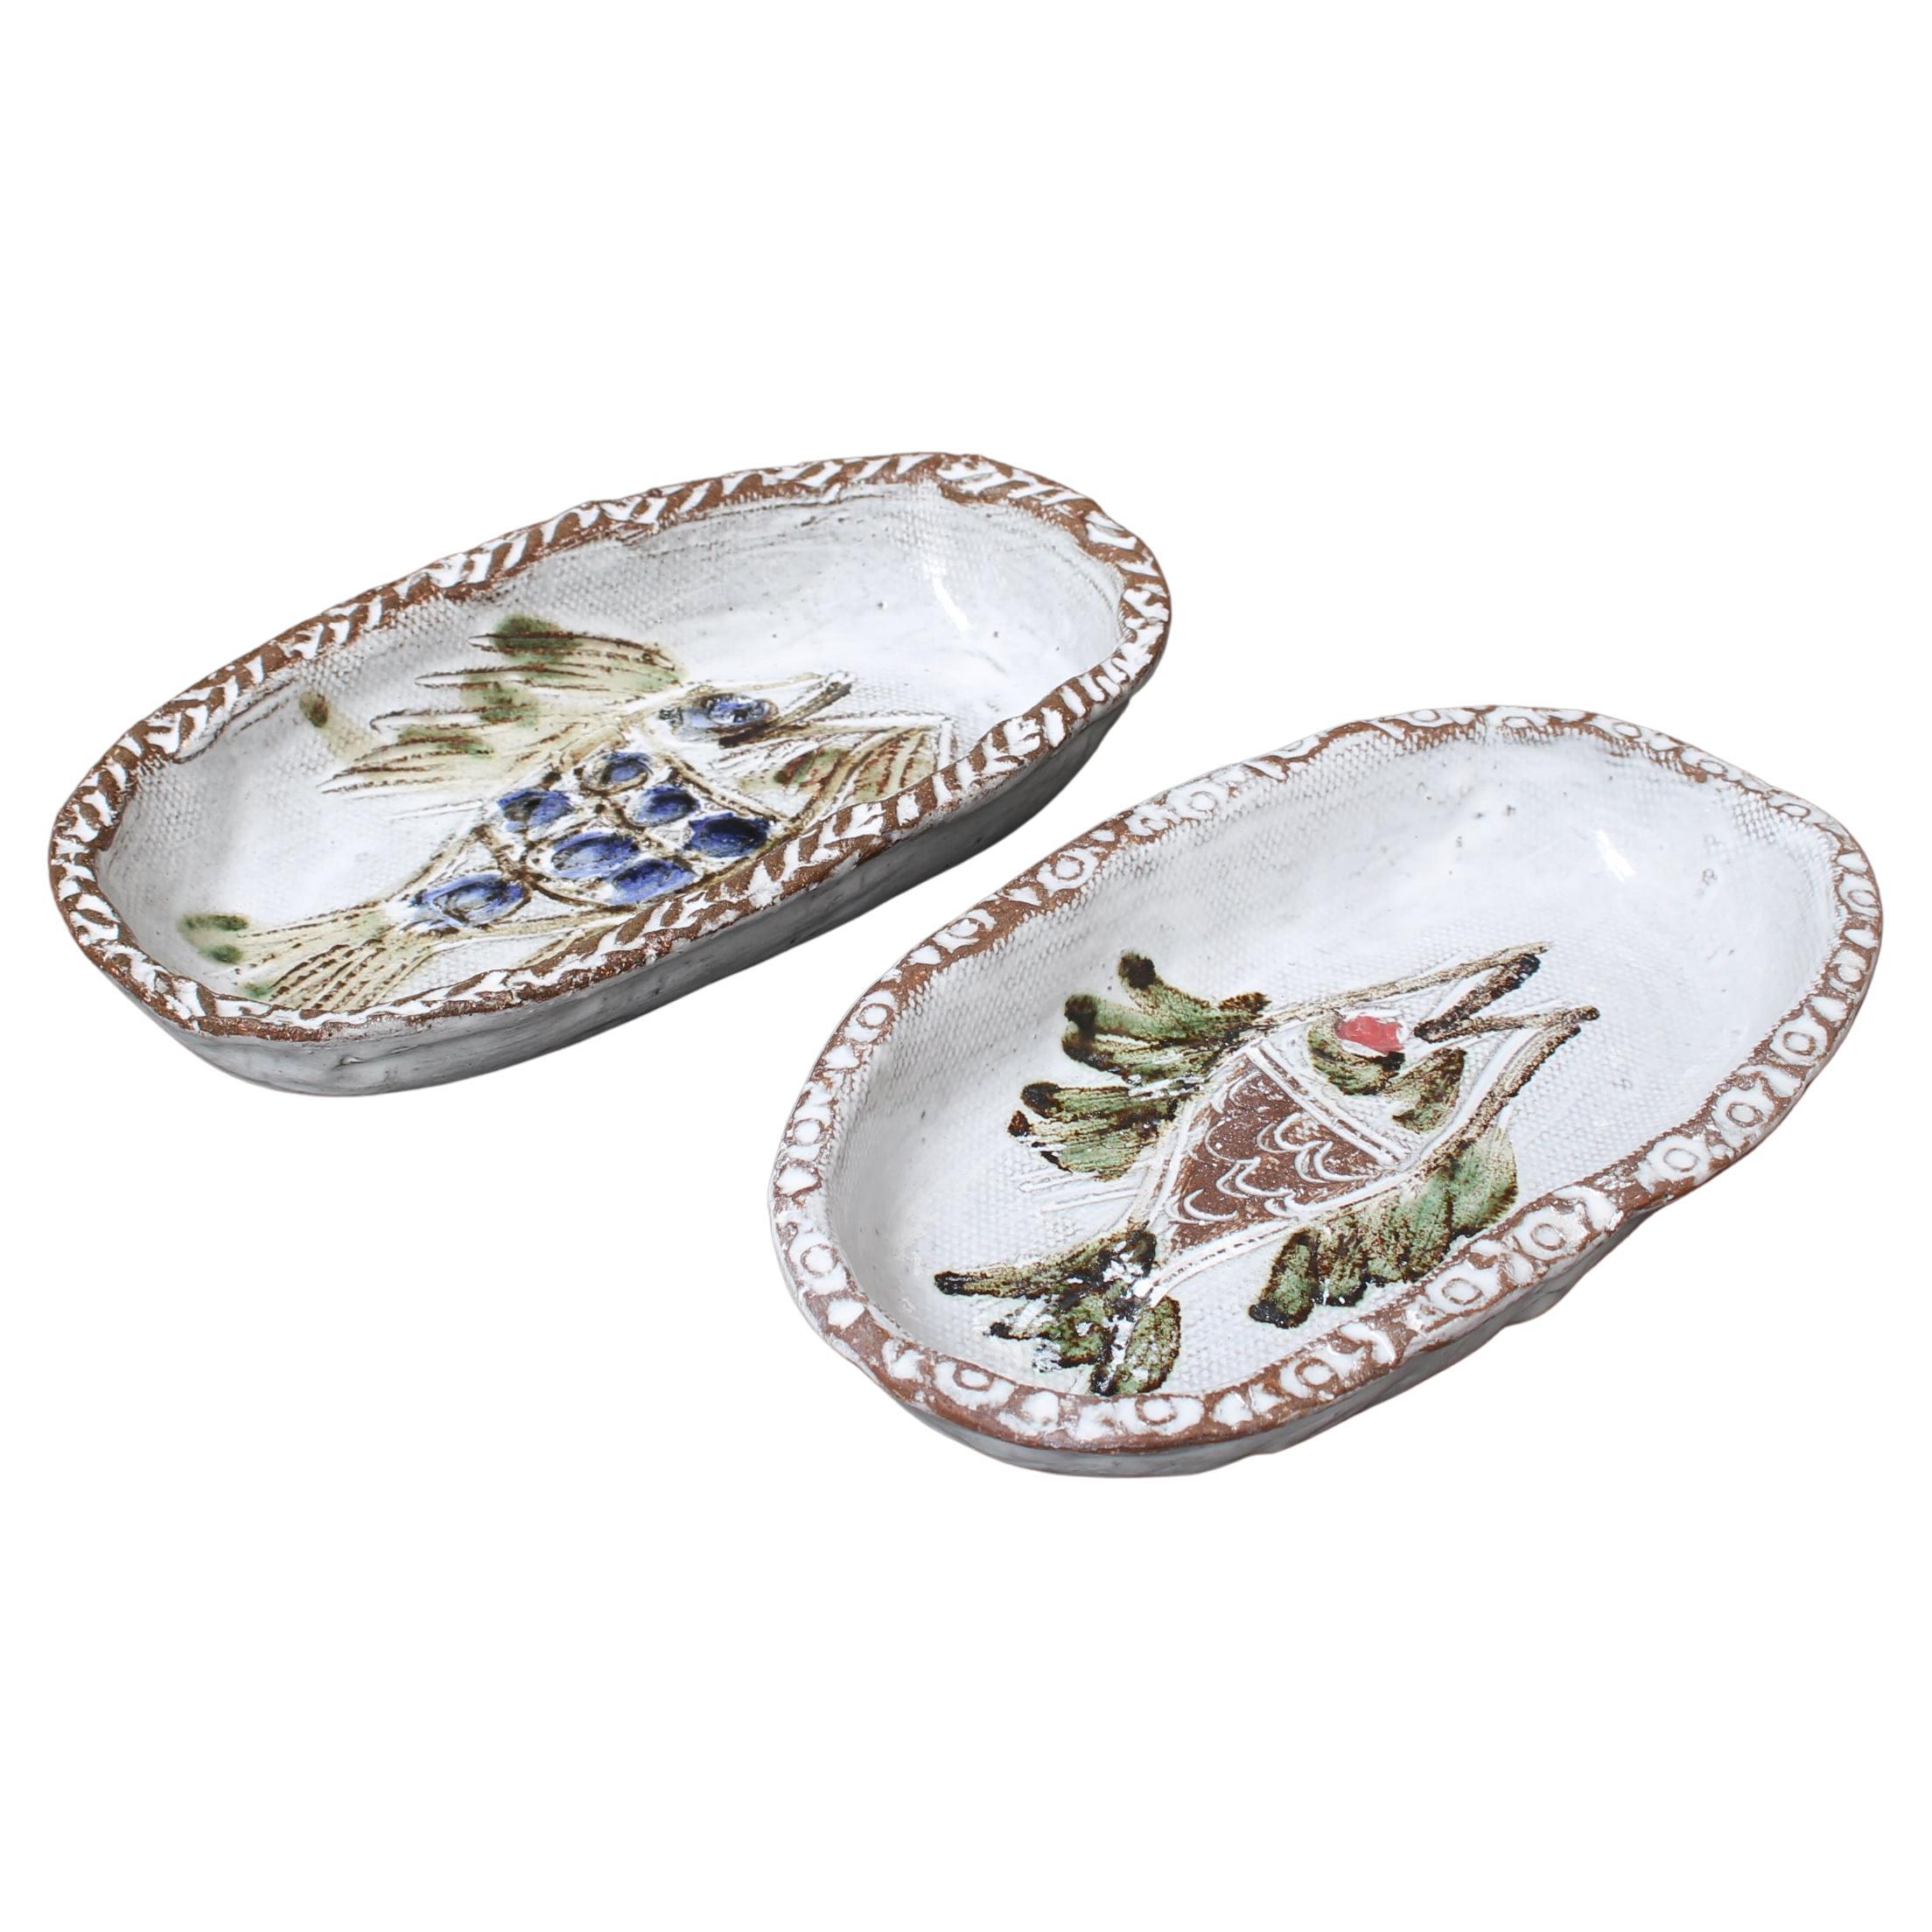 Pair of Small Vintage French Decorative Trays by Albert Thiry 'circa 1970s'